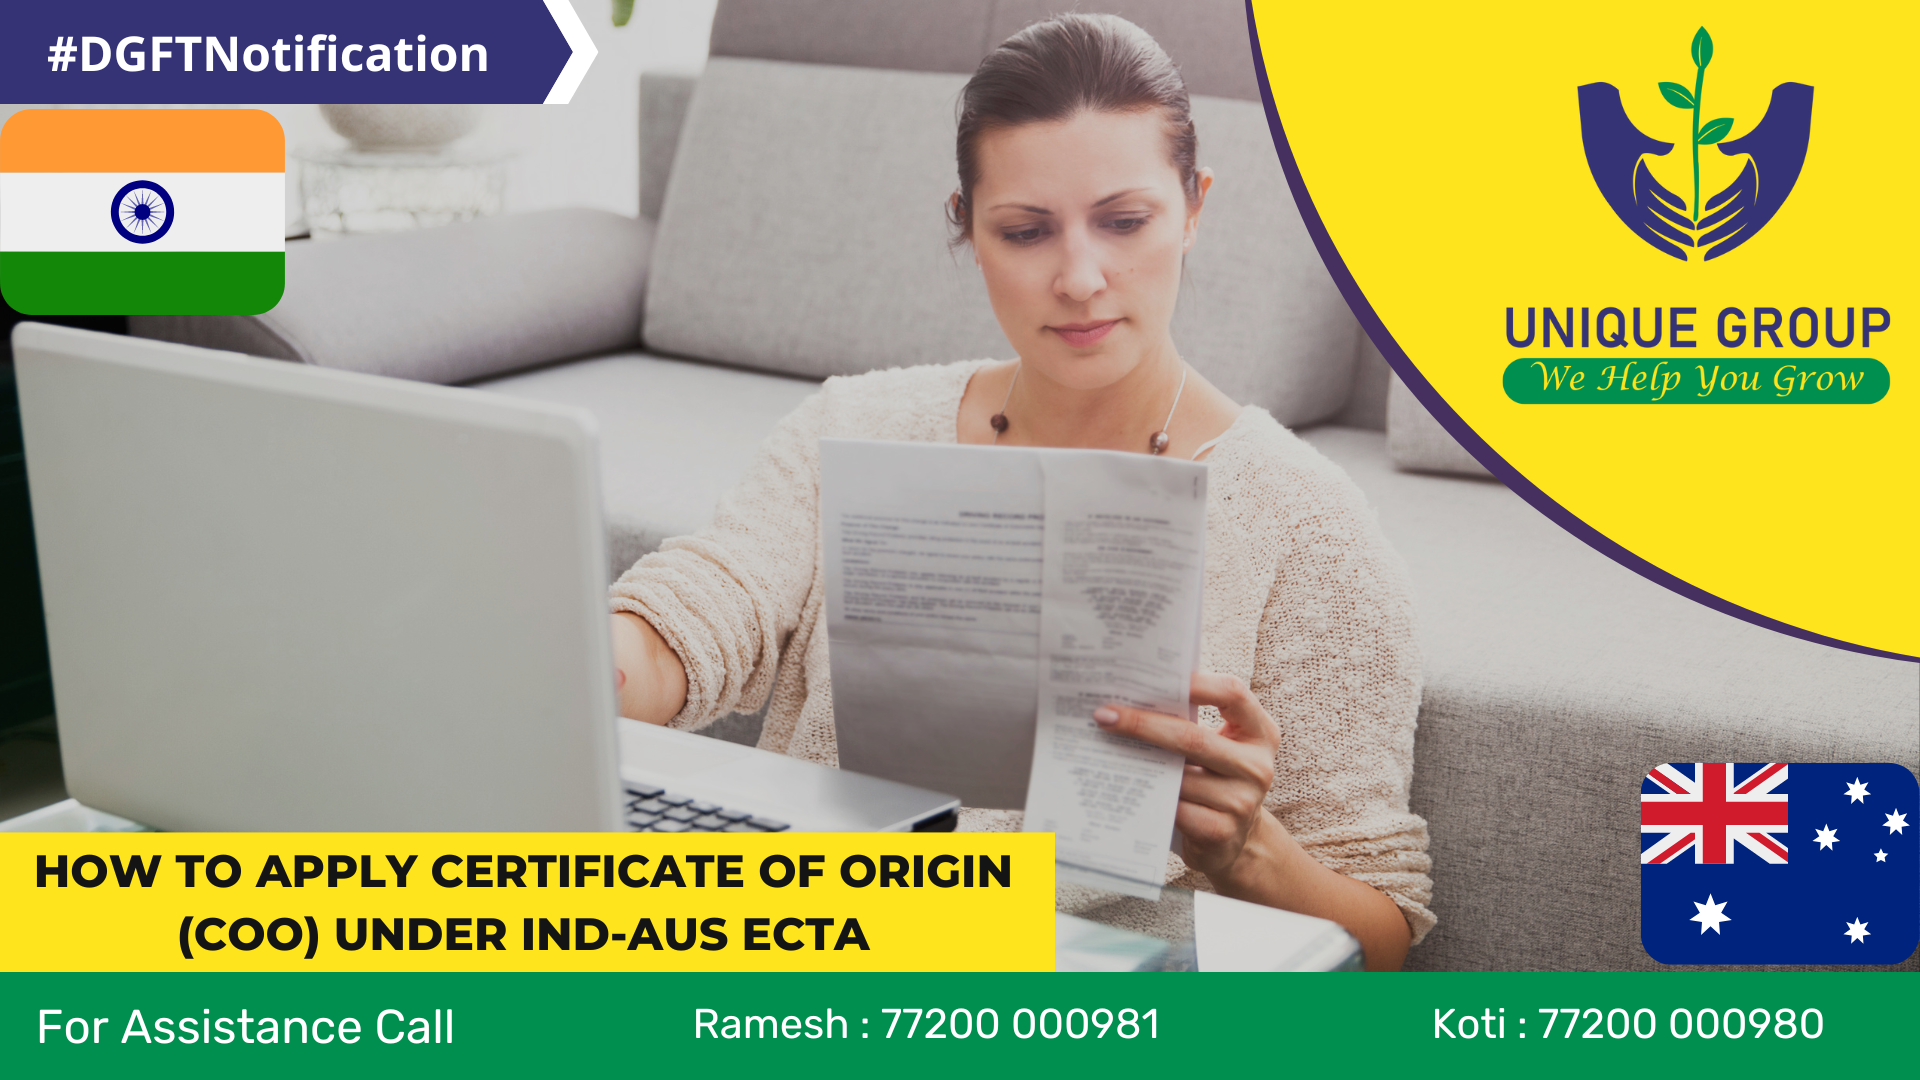 apply for Certificate of Origin (CoO) under Ind-Aus ECTA